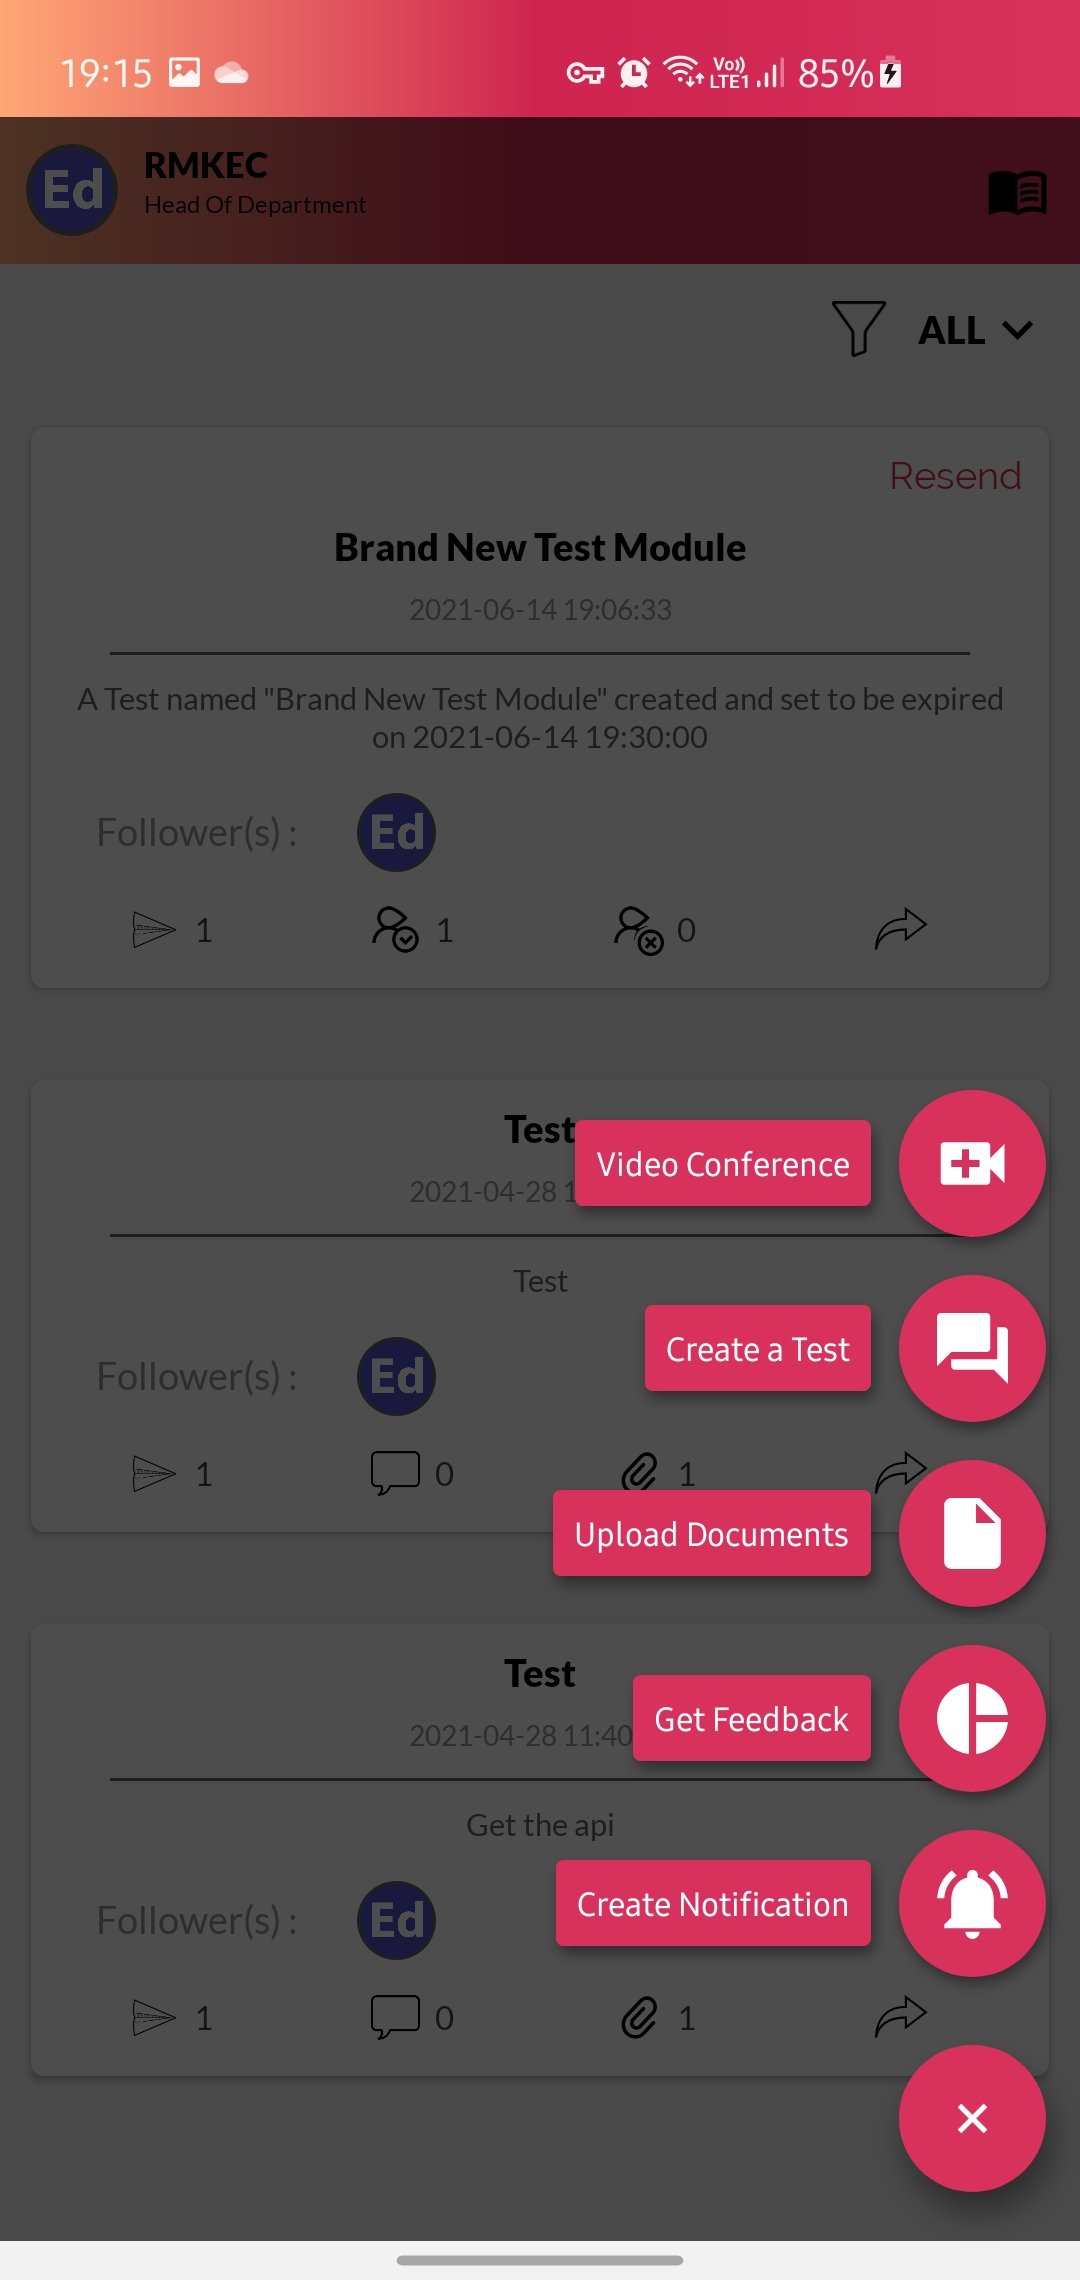 Click on “Create a Test” to start creating a test